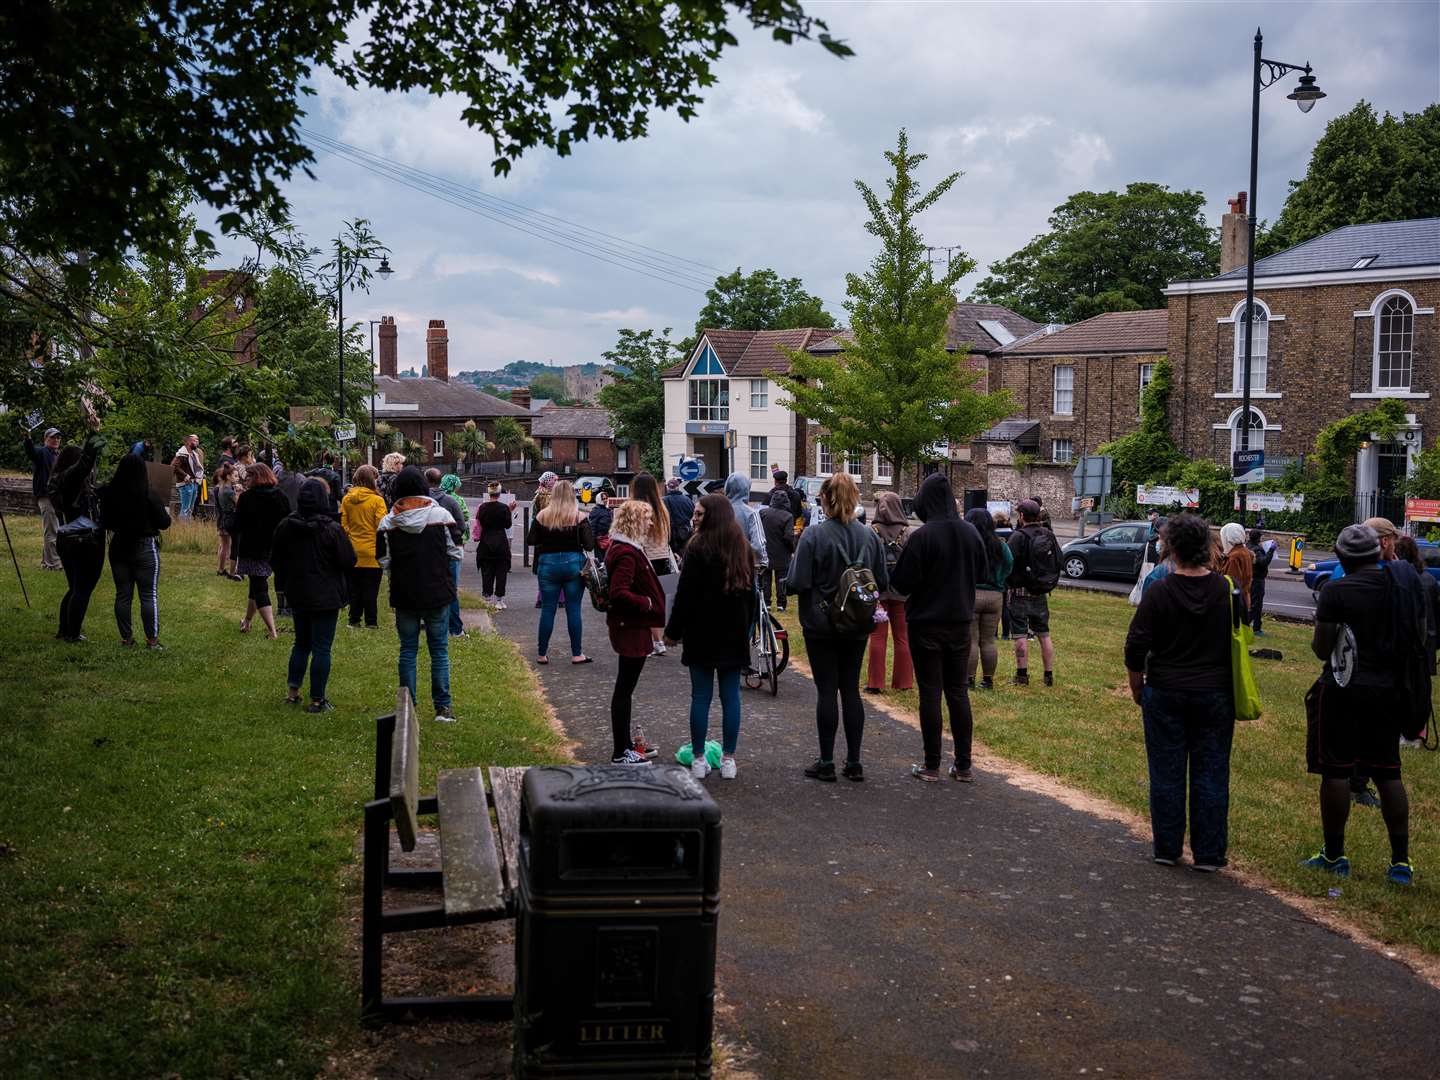 A Black Lives Matter Protest took place at Jackson Fields, Rochester Photo: Yousef Al Nasser